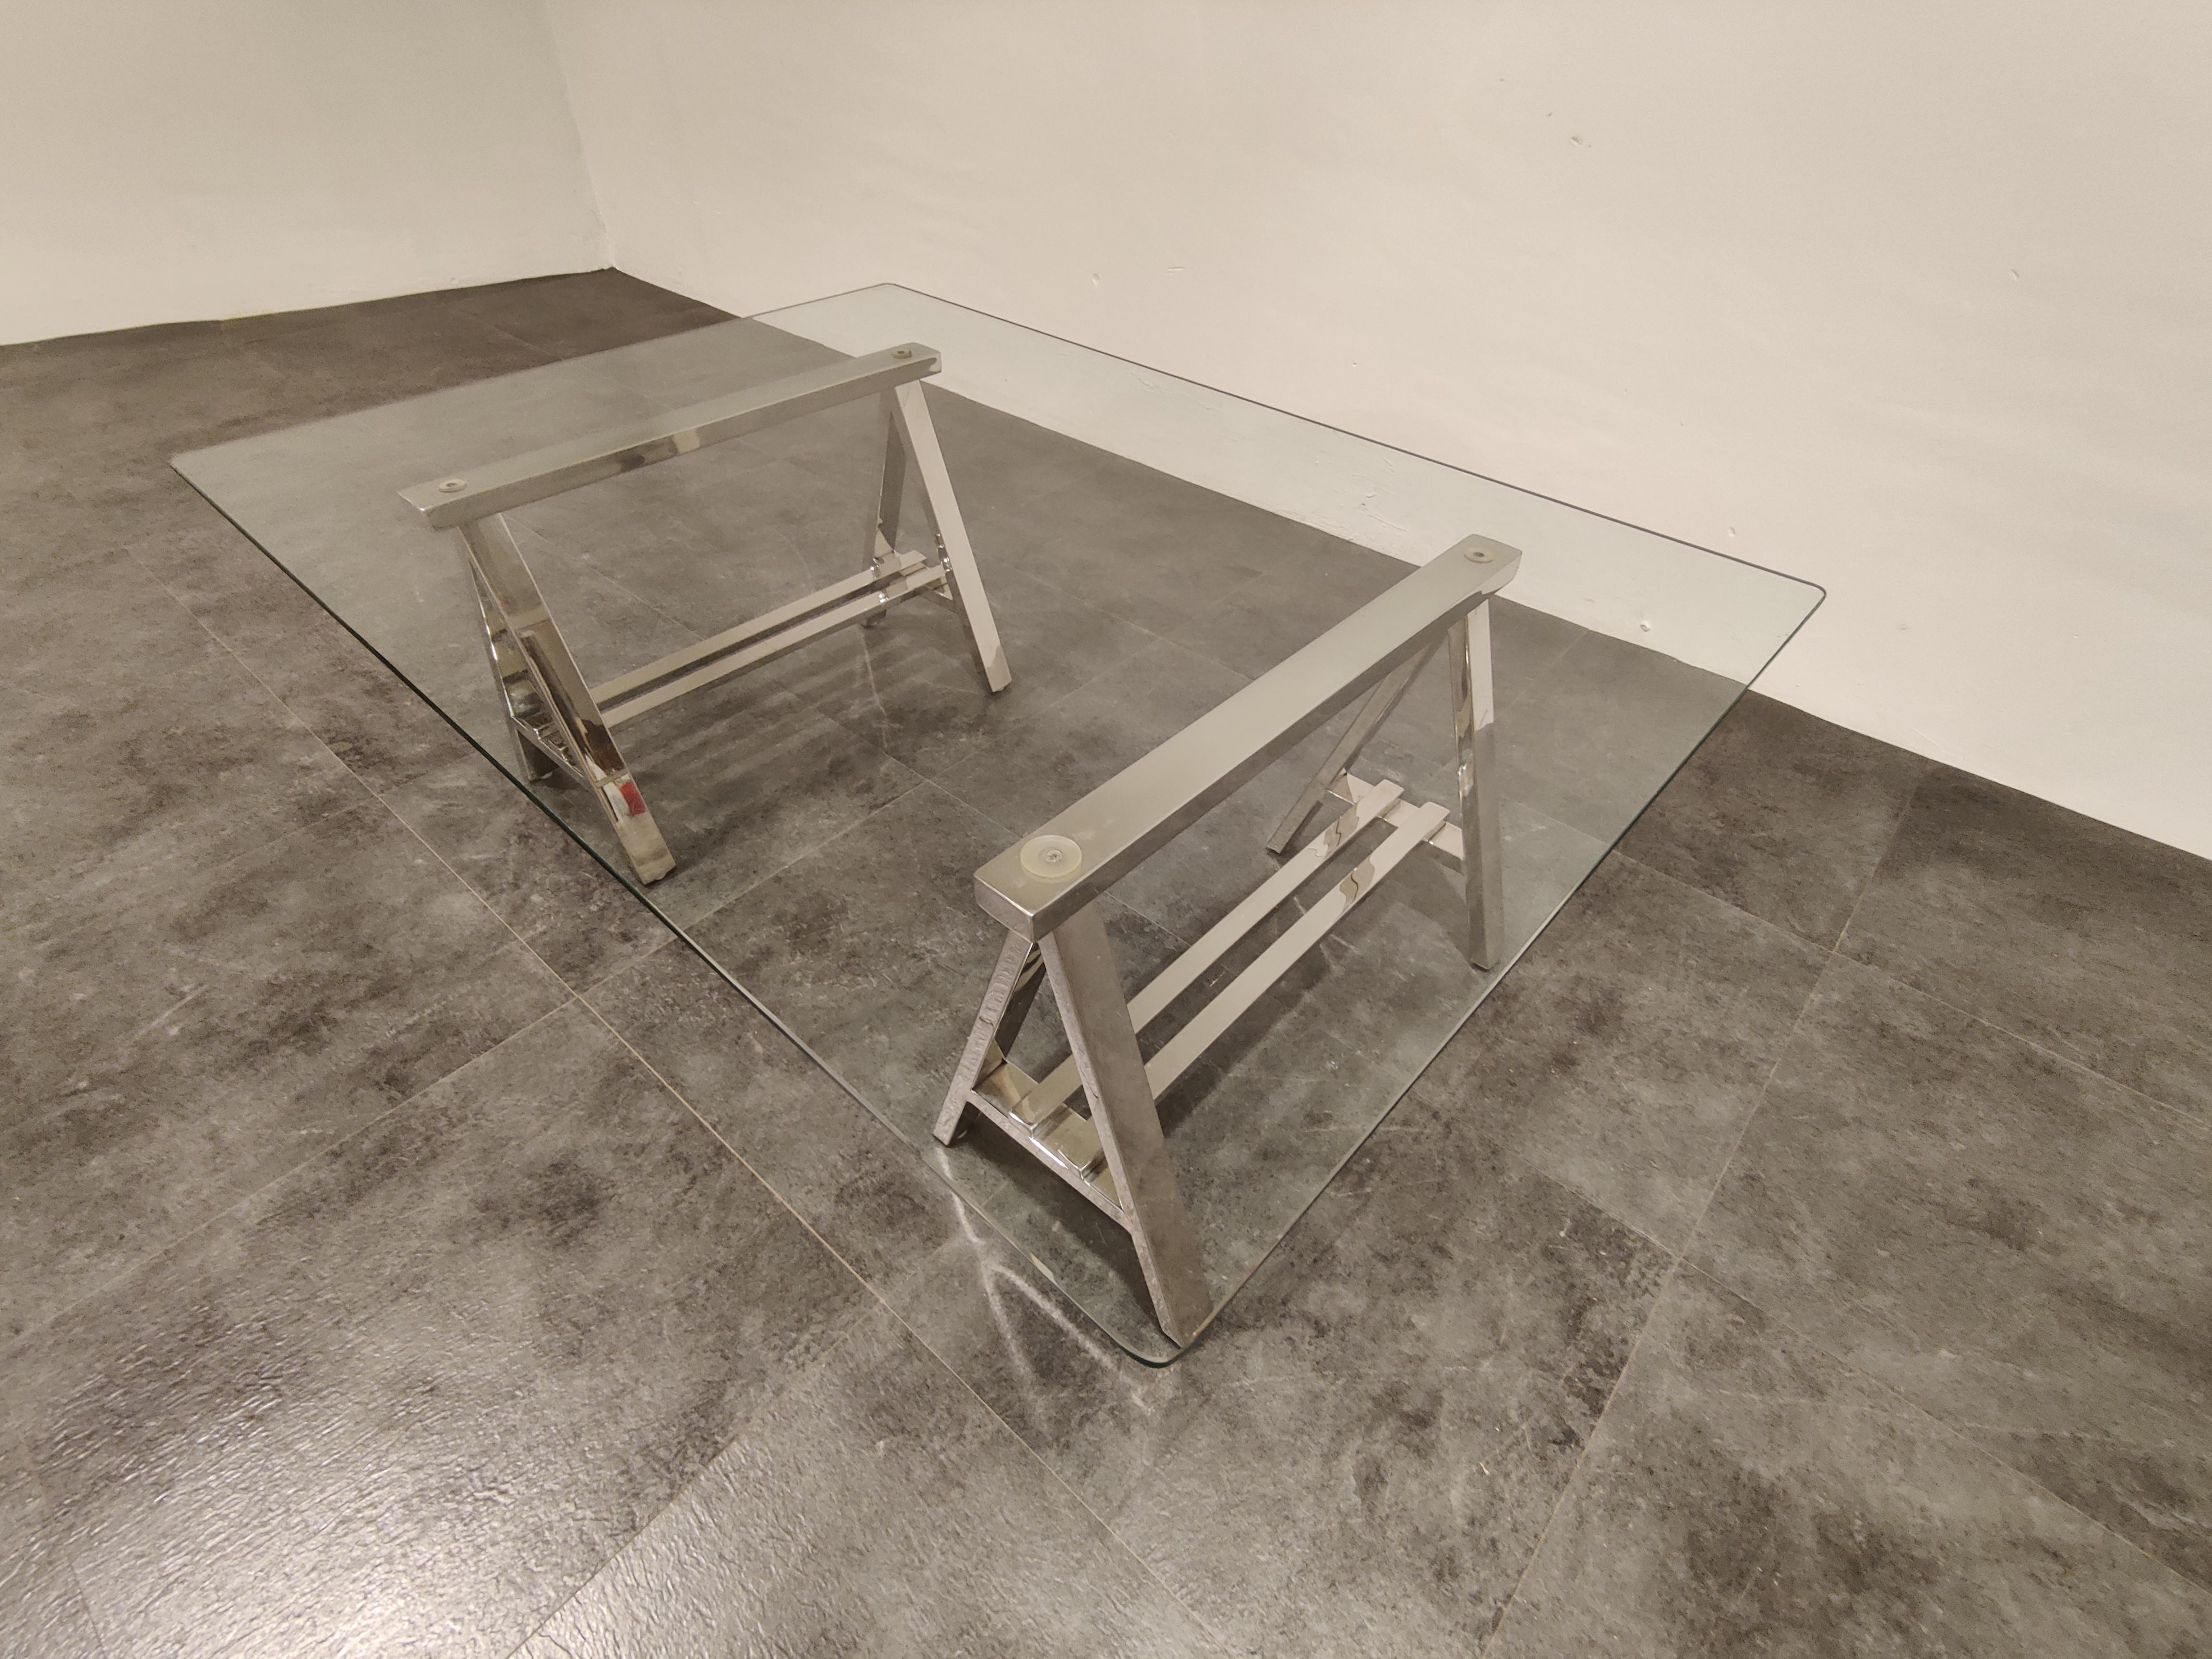 Unique coffee table consisting of two chrome trestle and a clear glass top.

Acquired in the 1980s at Roche Bobois, a French top end furniture retailer.

Hollywood Regency style.

Very good condition.

1980s, France

Dimensions:
Height